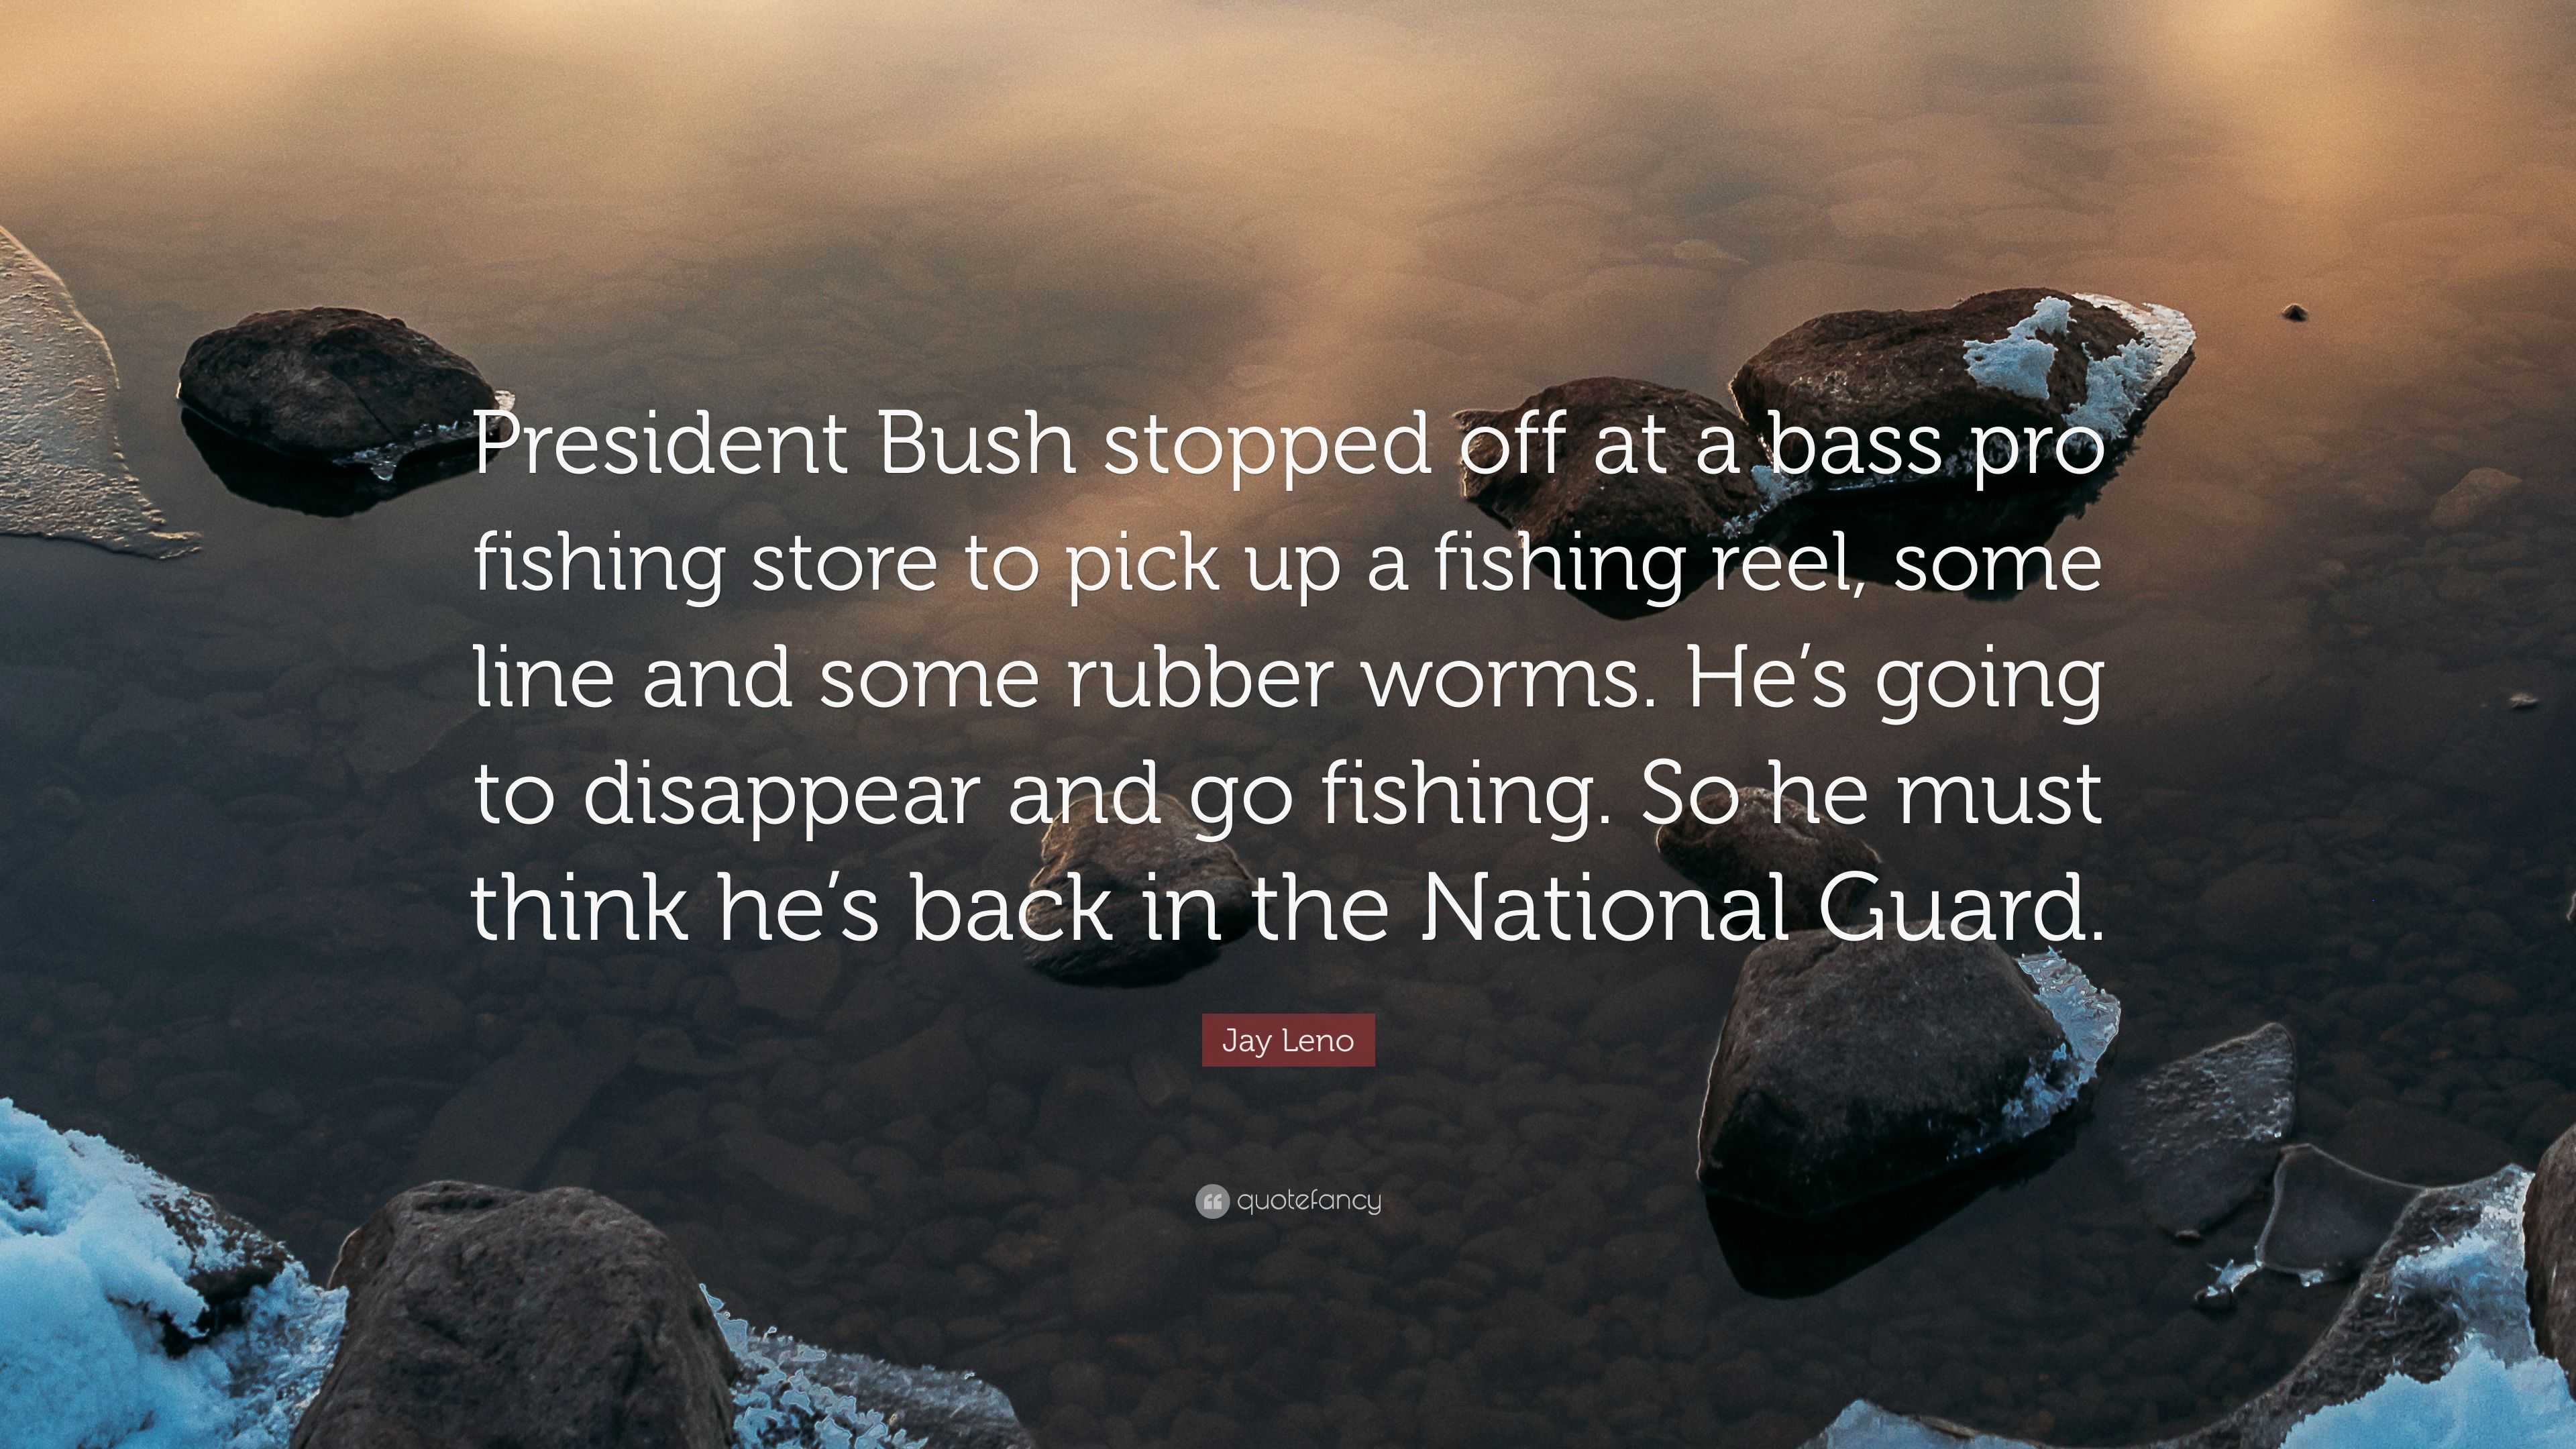 https://quotefancy.com/media/wallpaper/3840x2160/6114006-Jay-Leno-Quote-President-Bush-stopped-off-at-a-bass-pro-fishing.jpg